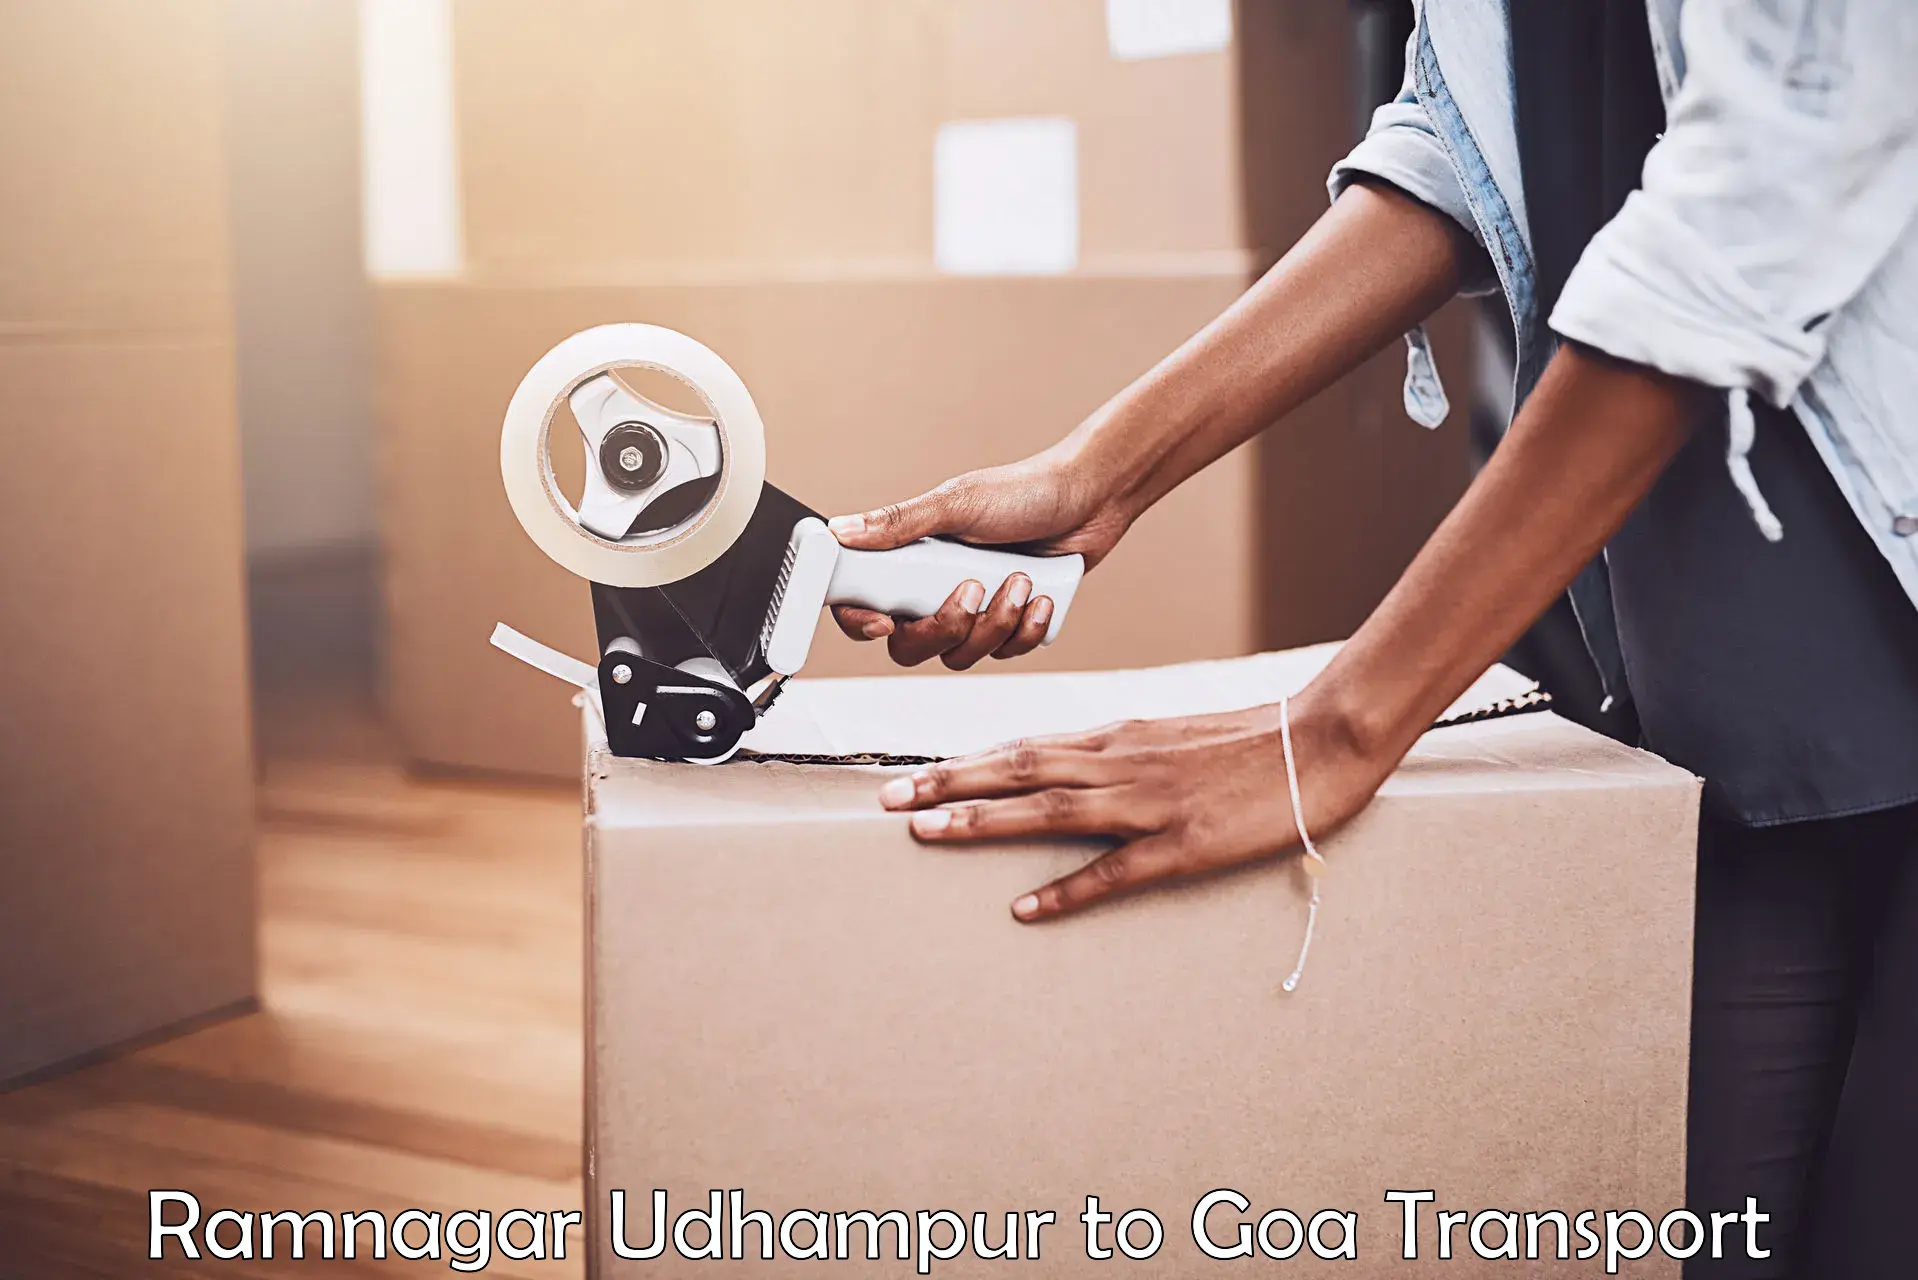 Delivery service Ramnagar Udhampur to Goa University